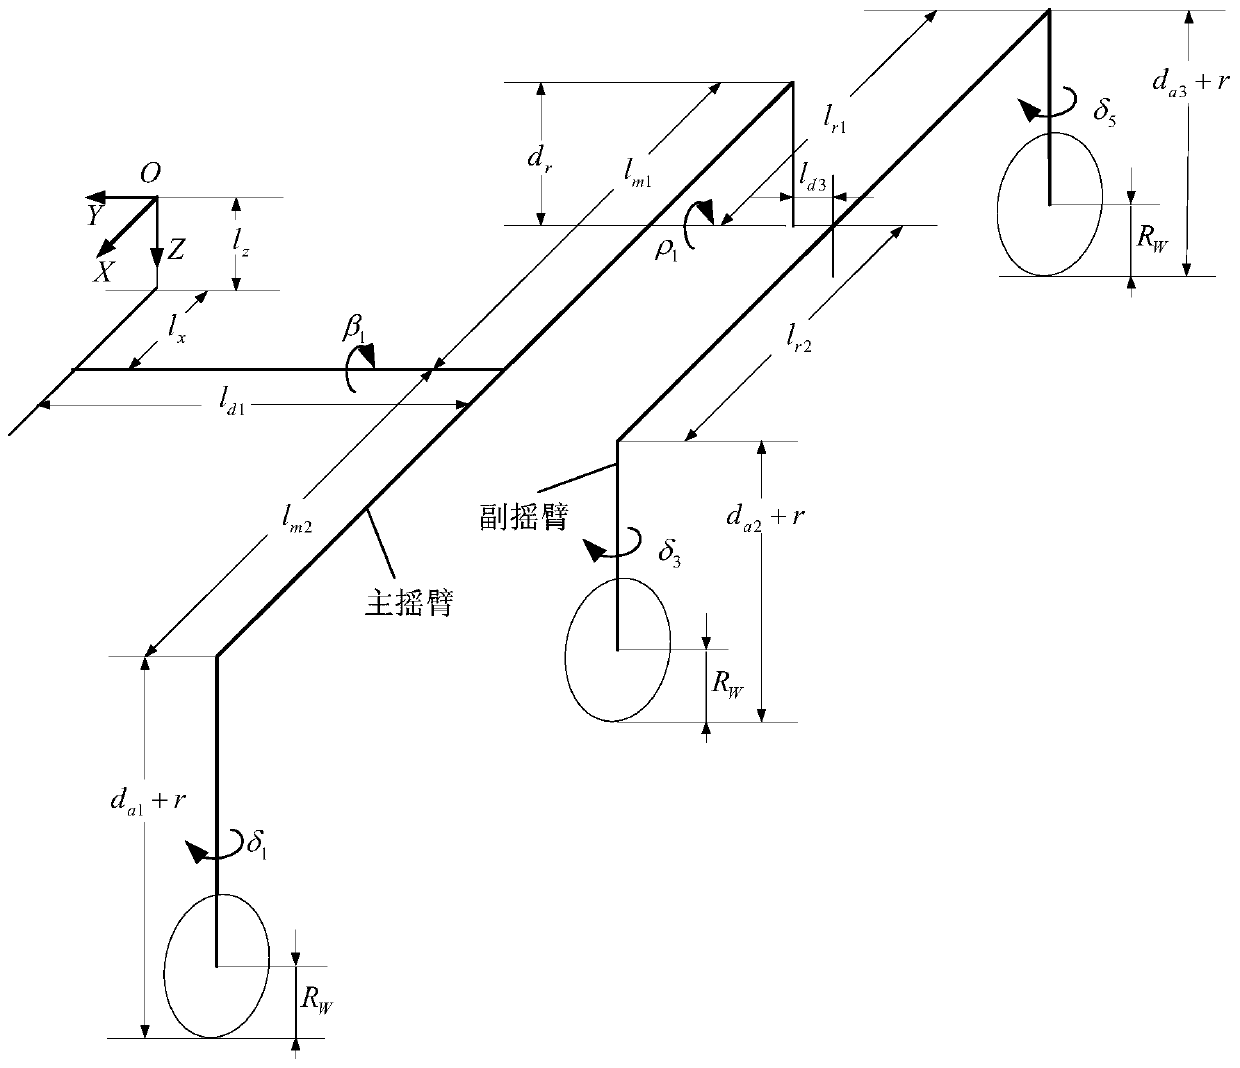 Local accurate positioning method for rocker arm suspension structure patroller